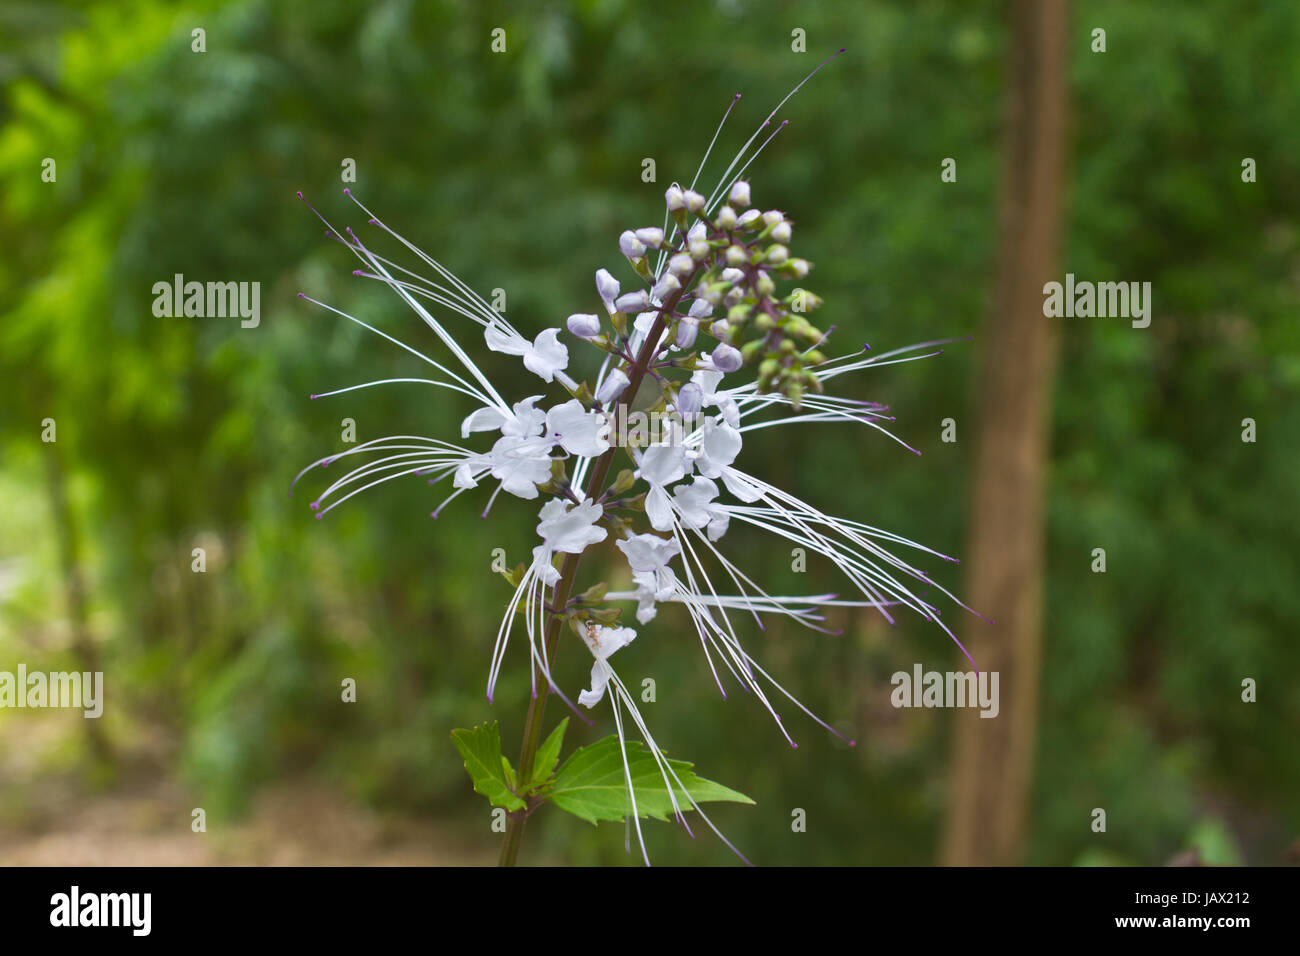 flower from Thailand, Cat's whiskers flowers, Orthosiphon stamineus, in the garden Stock Photo